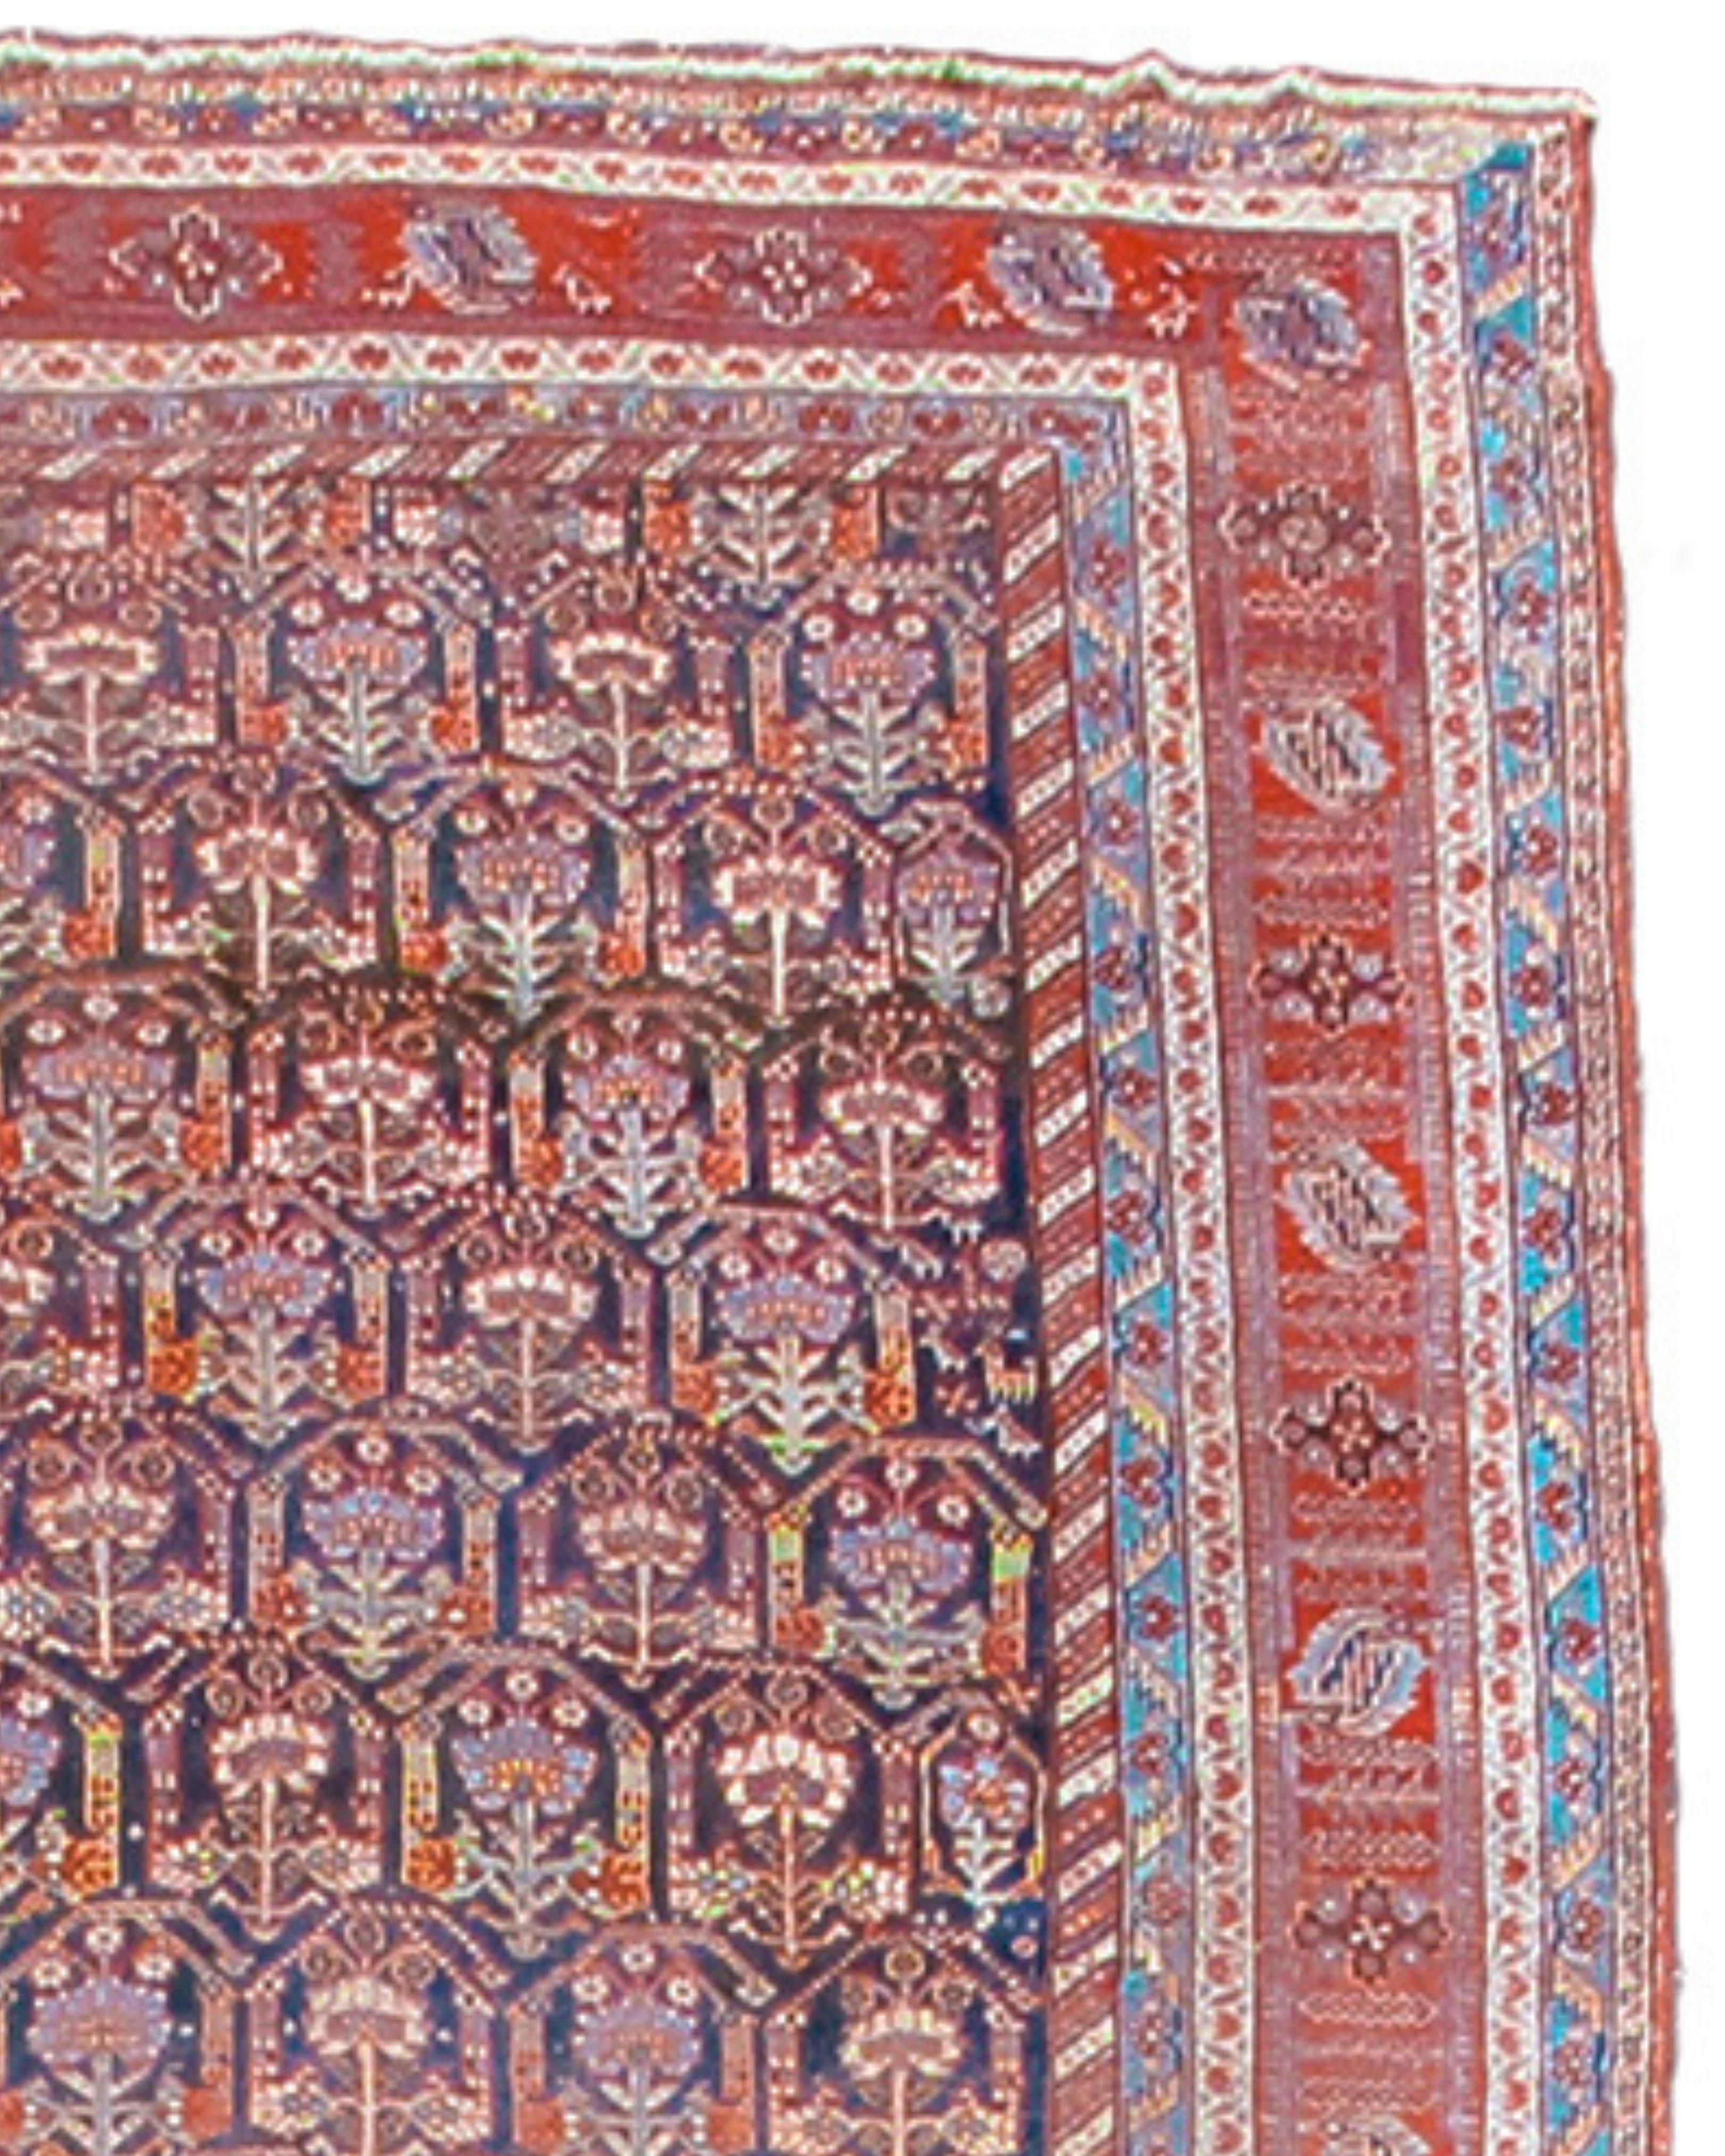 Afshar Long Rug, Late 19th Century

Additional information:
Dimensions: 7'0